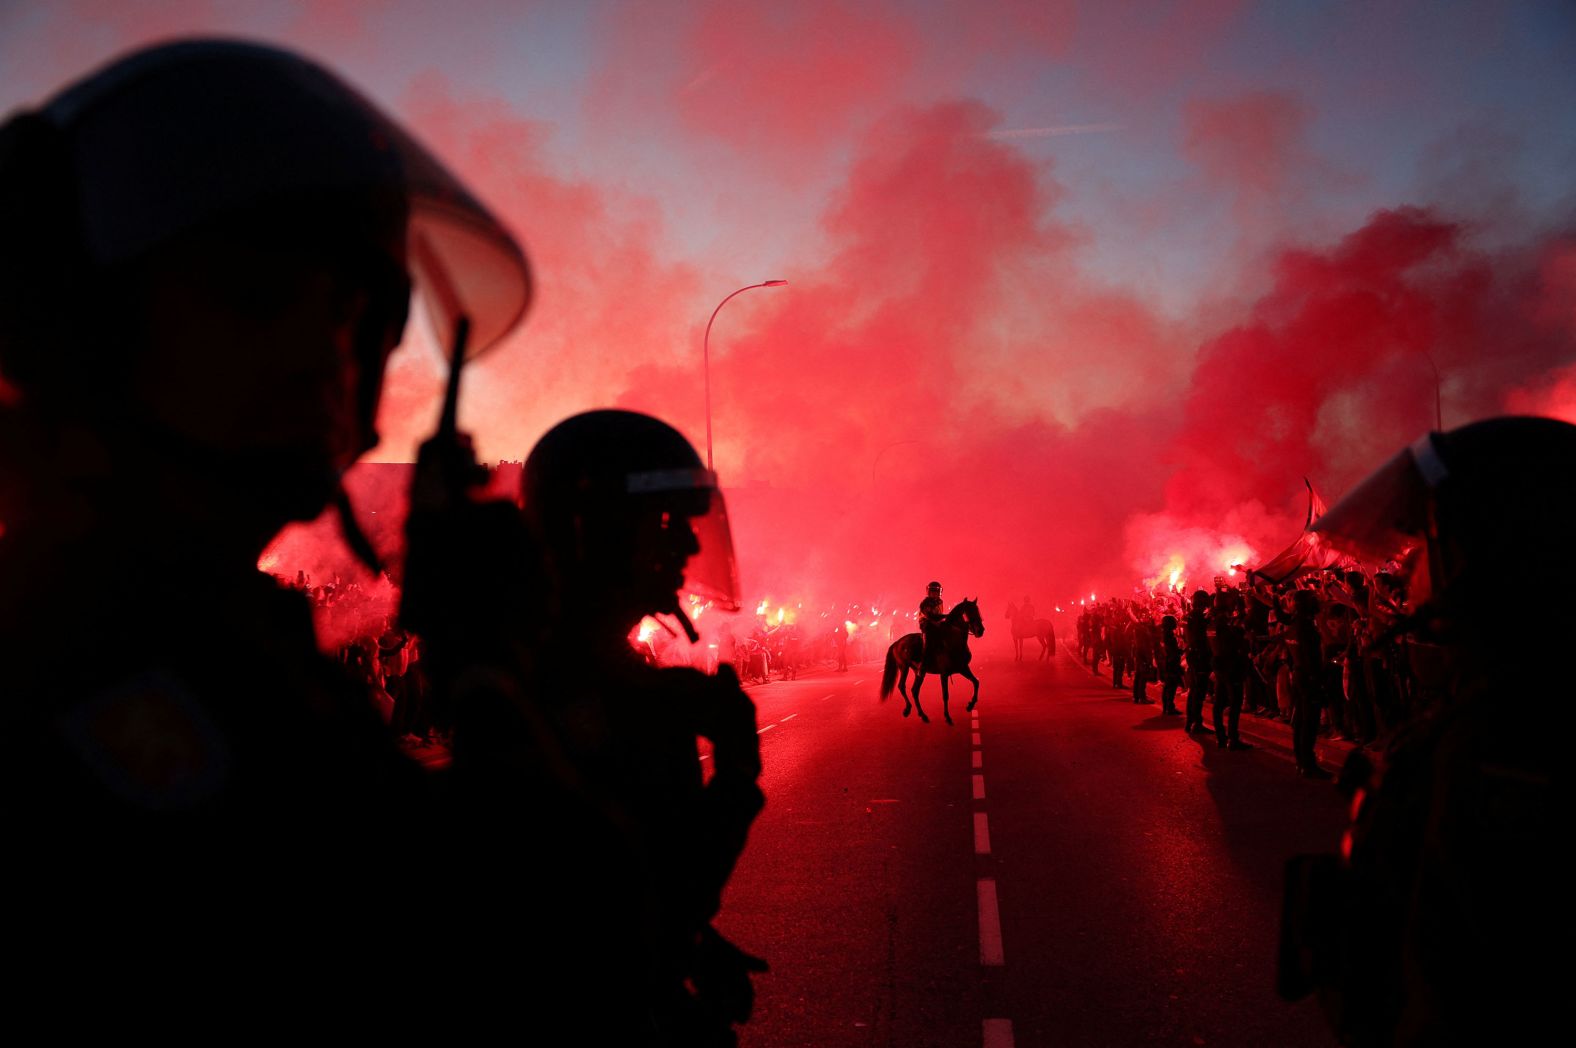 Police officers work outside Madrid's Metropolitano Stadium, where fans lit flares before a <a href="index.php?page=&url=https%3A%2F%2Fwww.cnn.com%2F2024%2F03%2F14%2Fsport%2Fatletico-madrid-champions-league-quarterfinals-spt-intl%2Findex.html" target="_blank">Champions League match</a> between Atlético Madrid and Inter Milan on Wednesday, March 13.